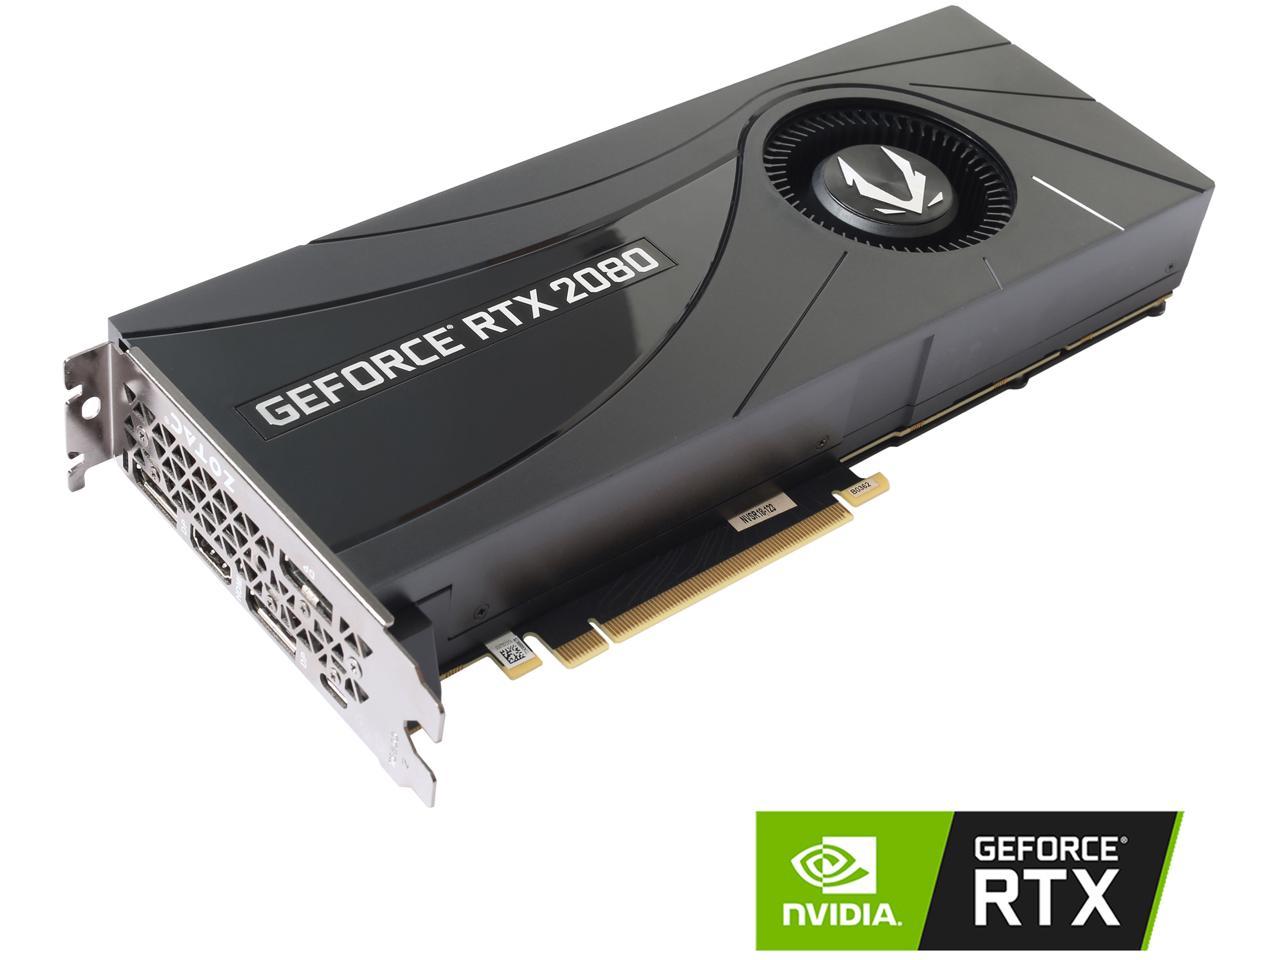 ZOTAC GAMING GeForce RTX 2080 Blower 8GB GDDR6 256-bit Gaming Graphics  Card, Metal Backplate (ZT-T20800A-10P)